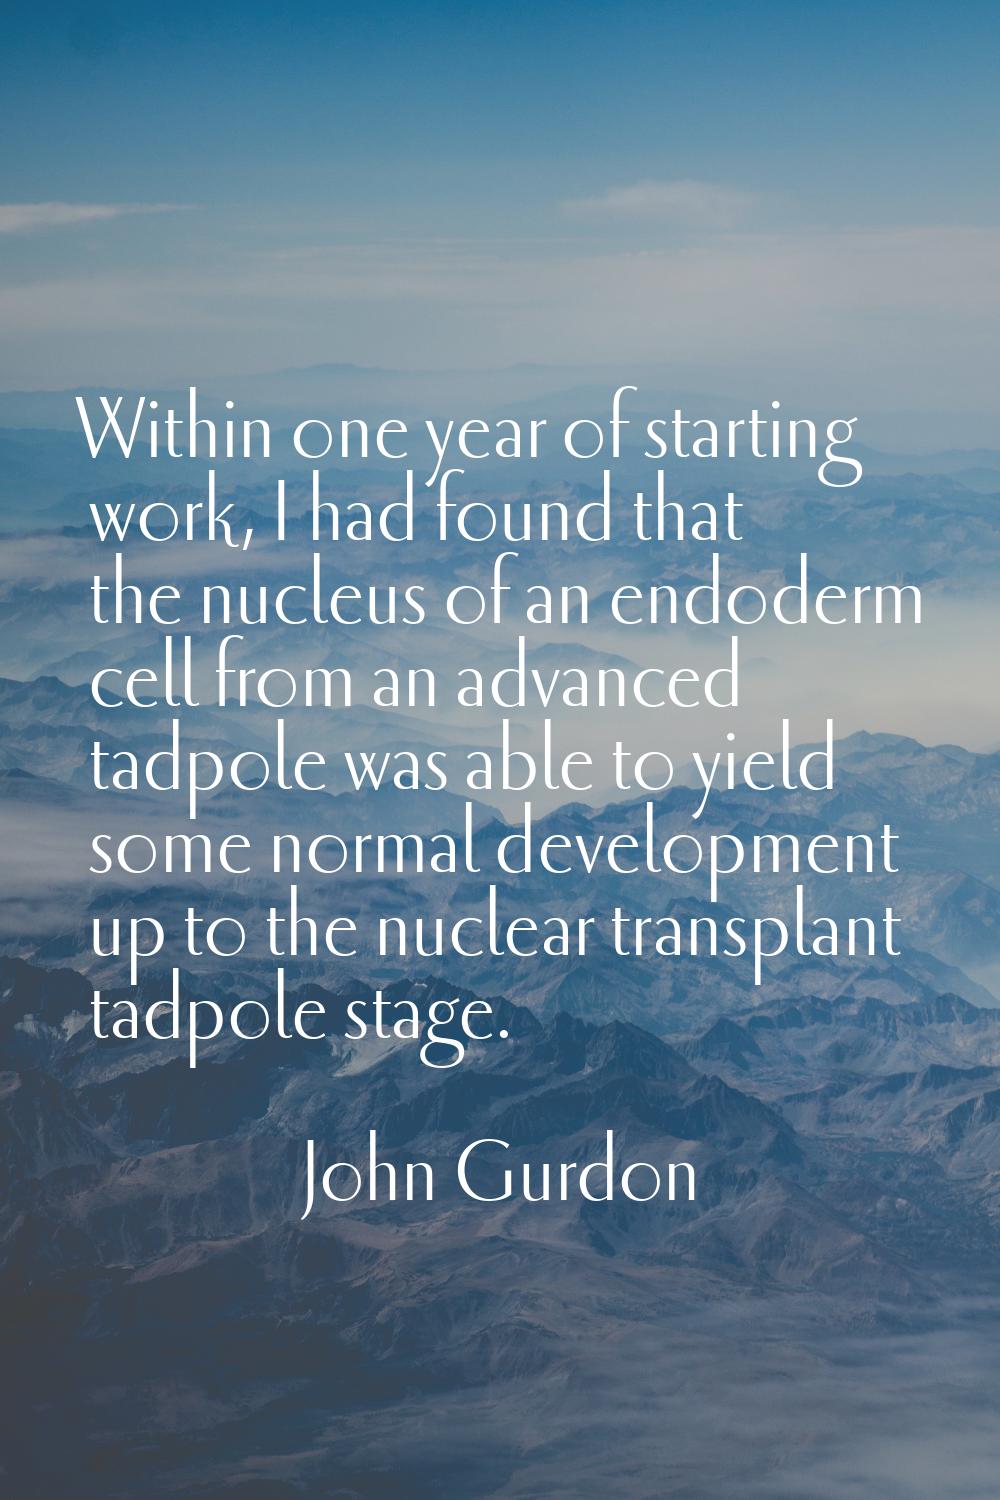 Within one year of starting work, I had found that the nucleus of an endoderm cell from an advanced